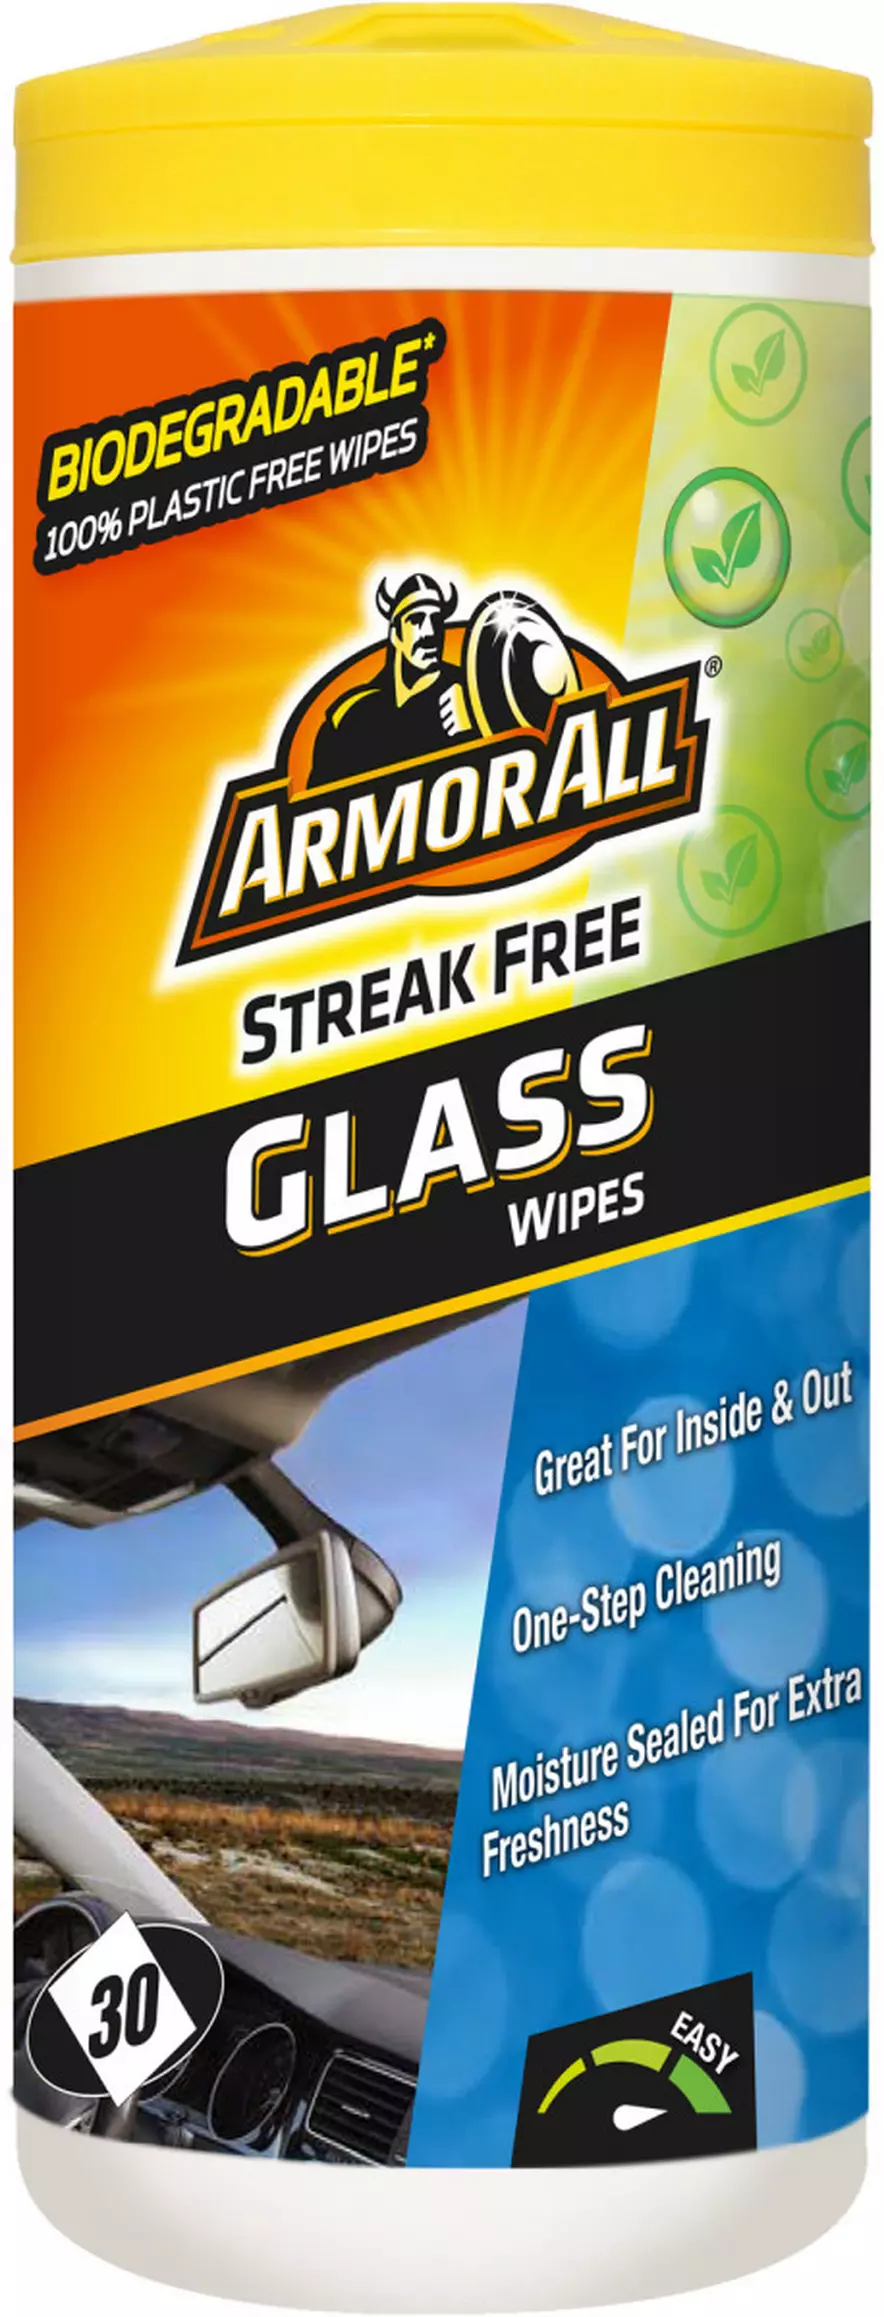 Armor All Glass Wipes, 30 count